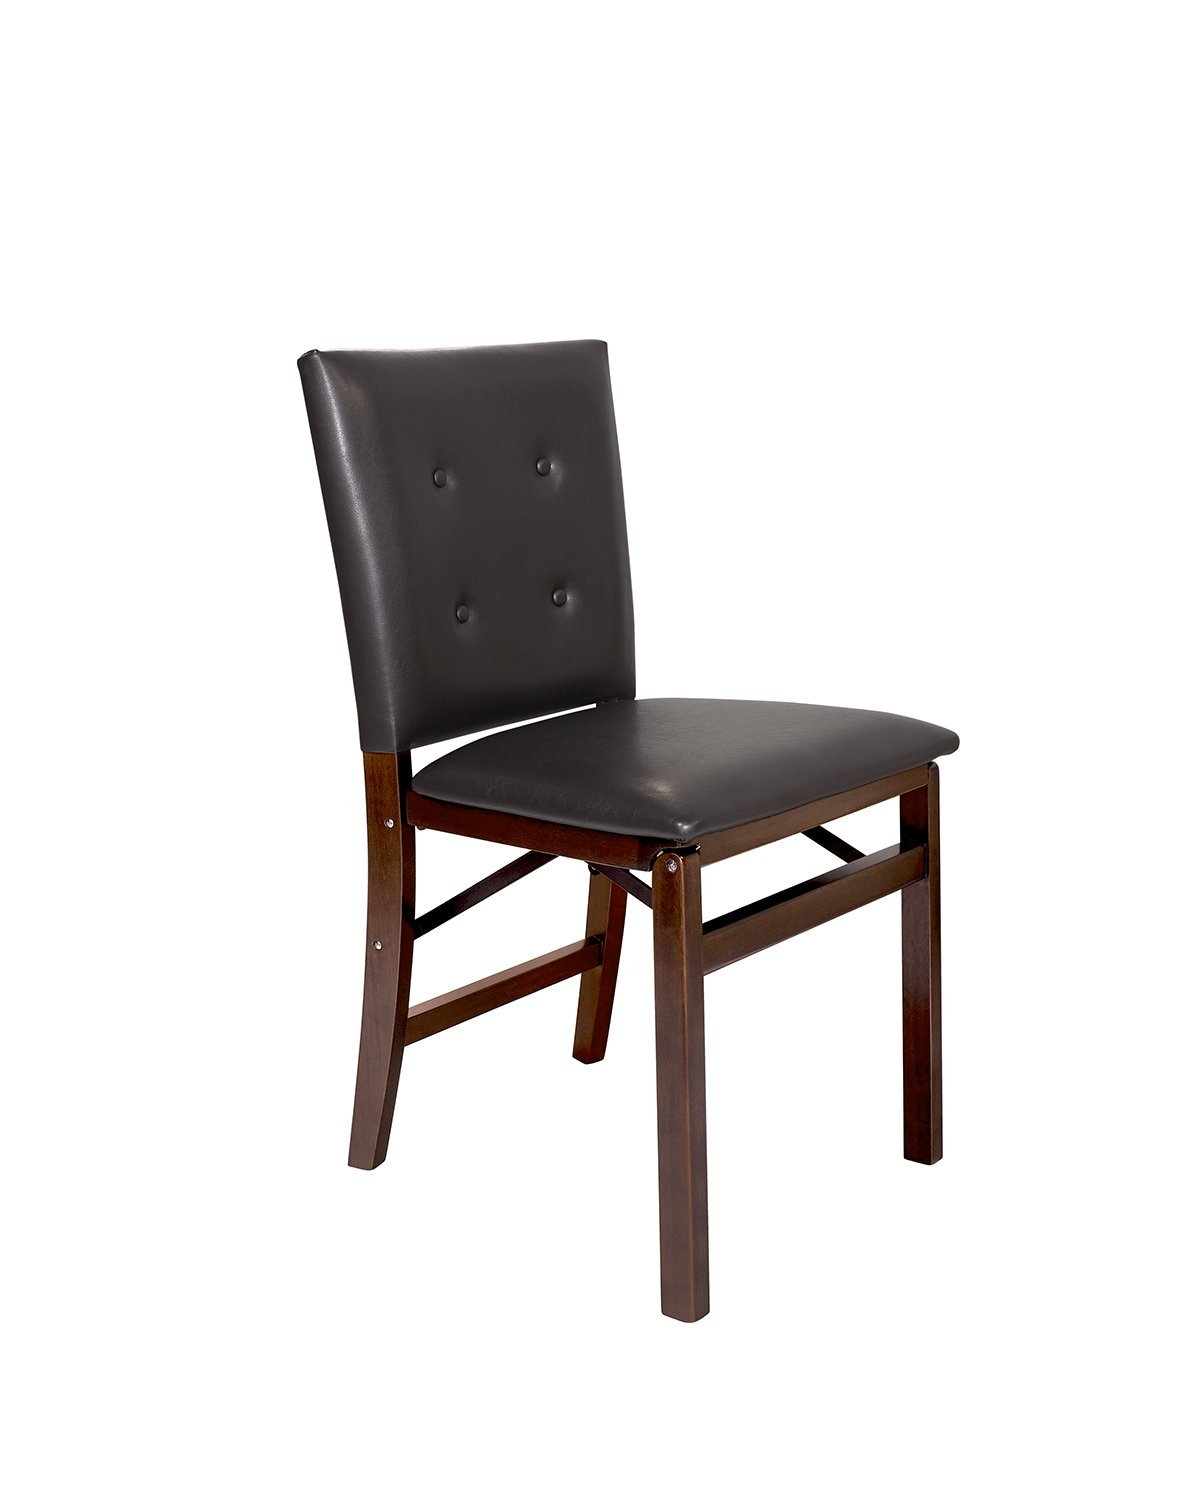 Meco Industries Stakmore Chair Espresso